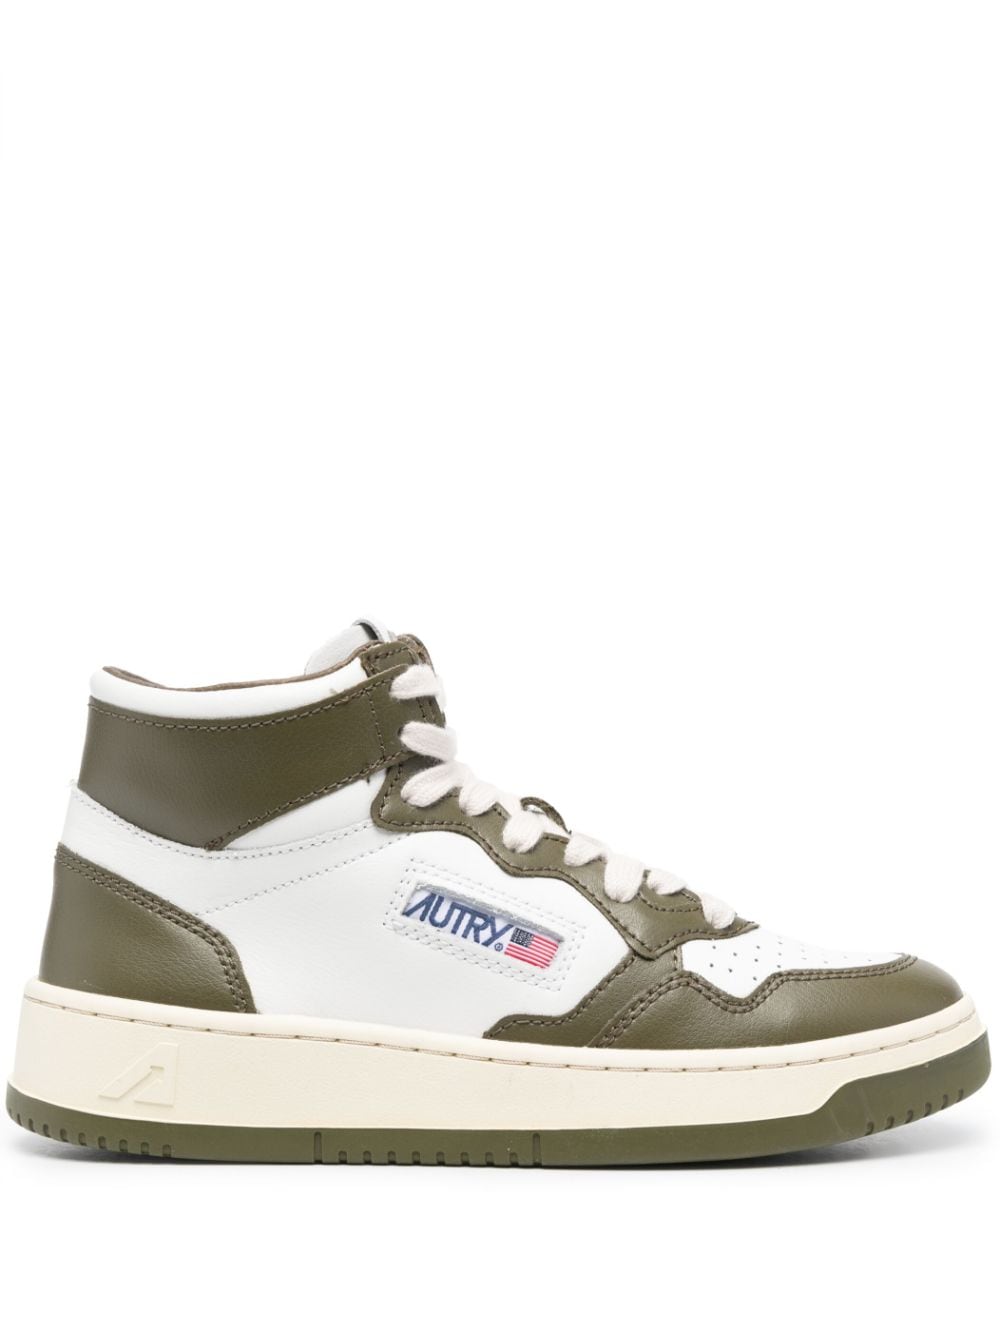 Autry panelled leather high-top sneakers - White von Autry